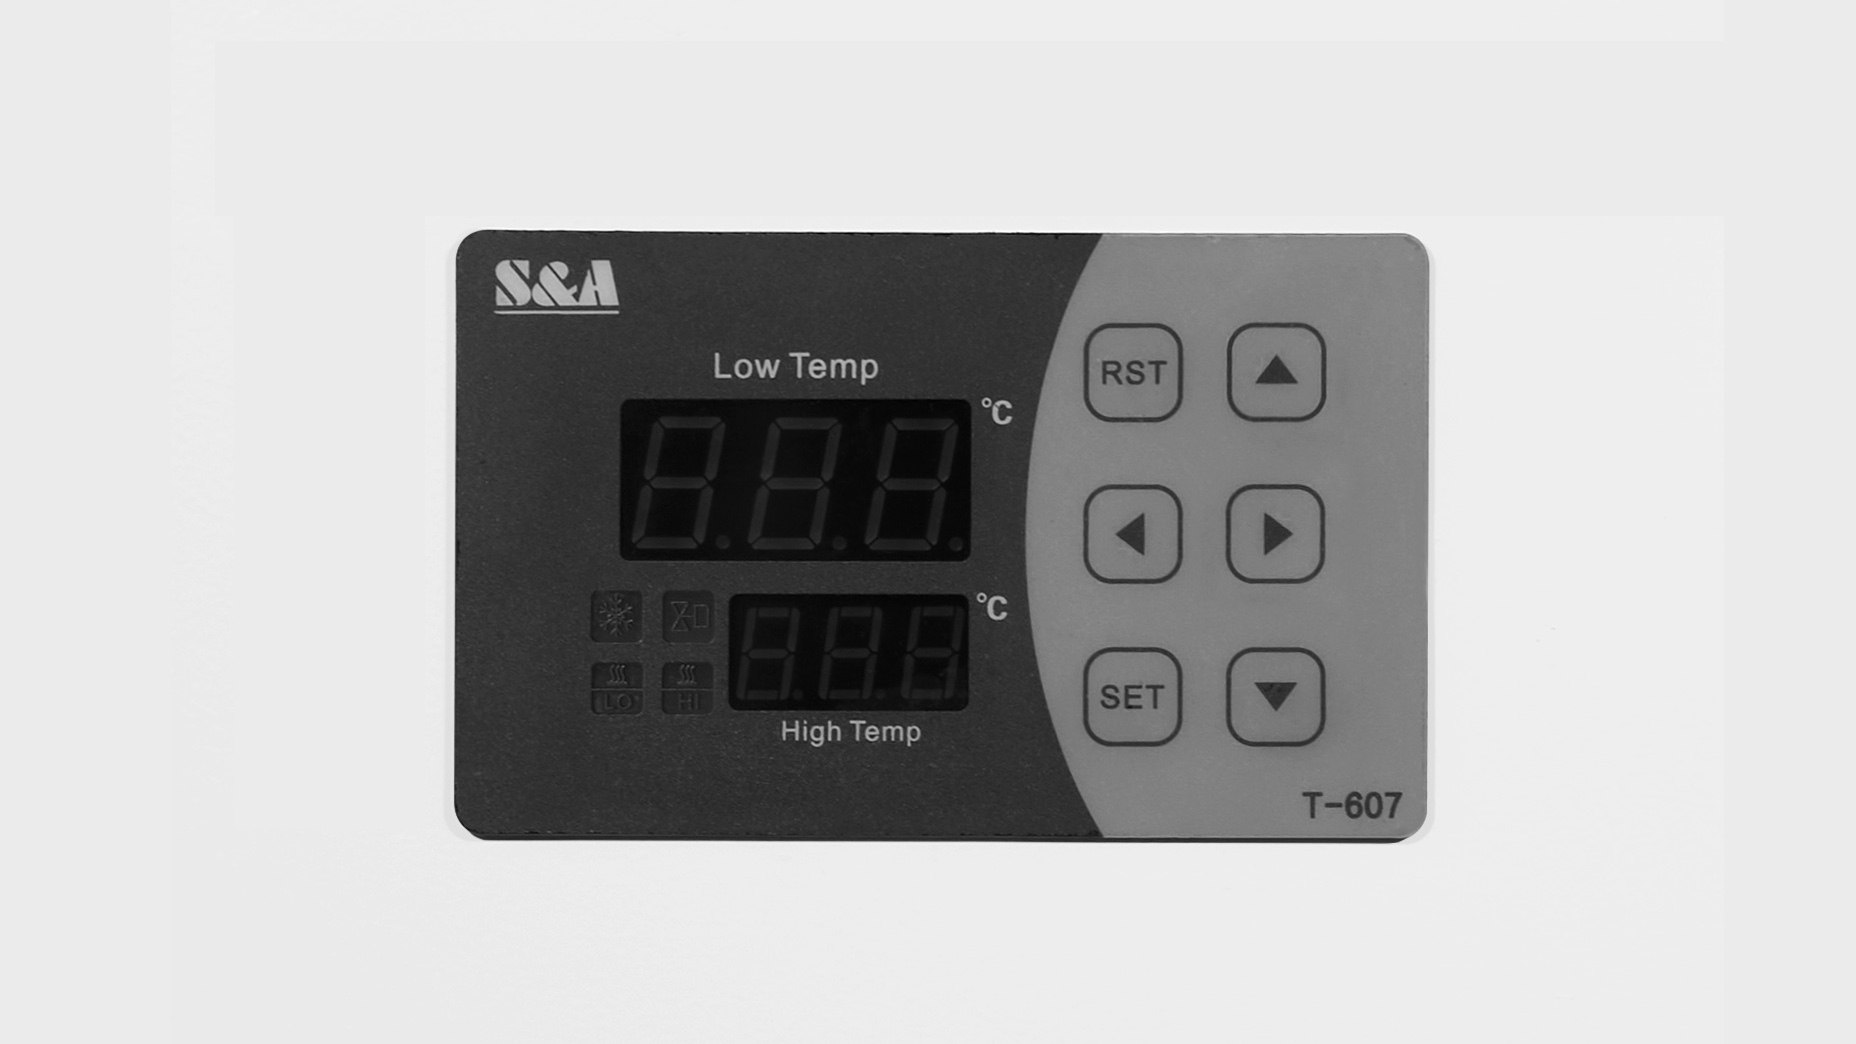 S&A CWFL-1500 Laser Chiller Temperature Controller T-607